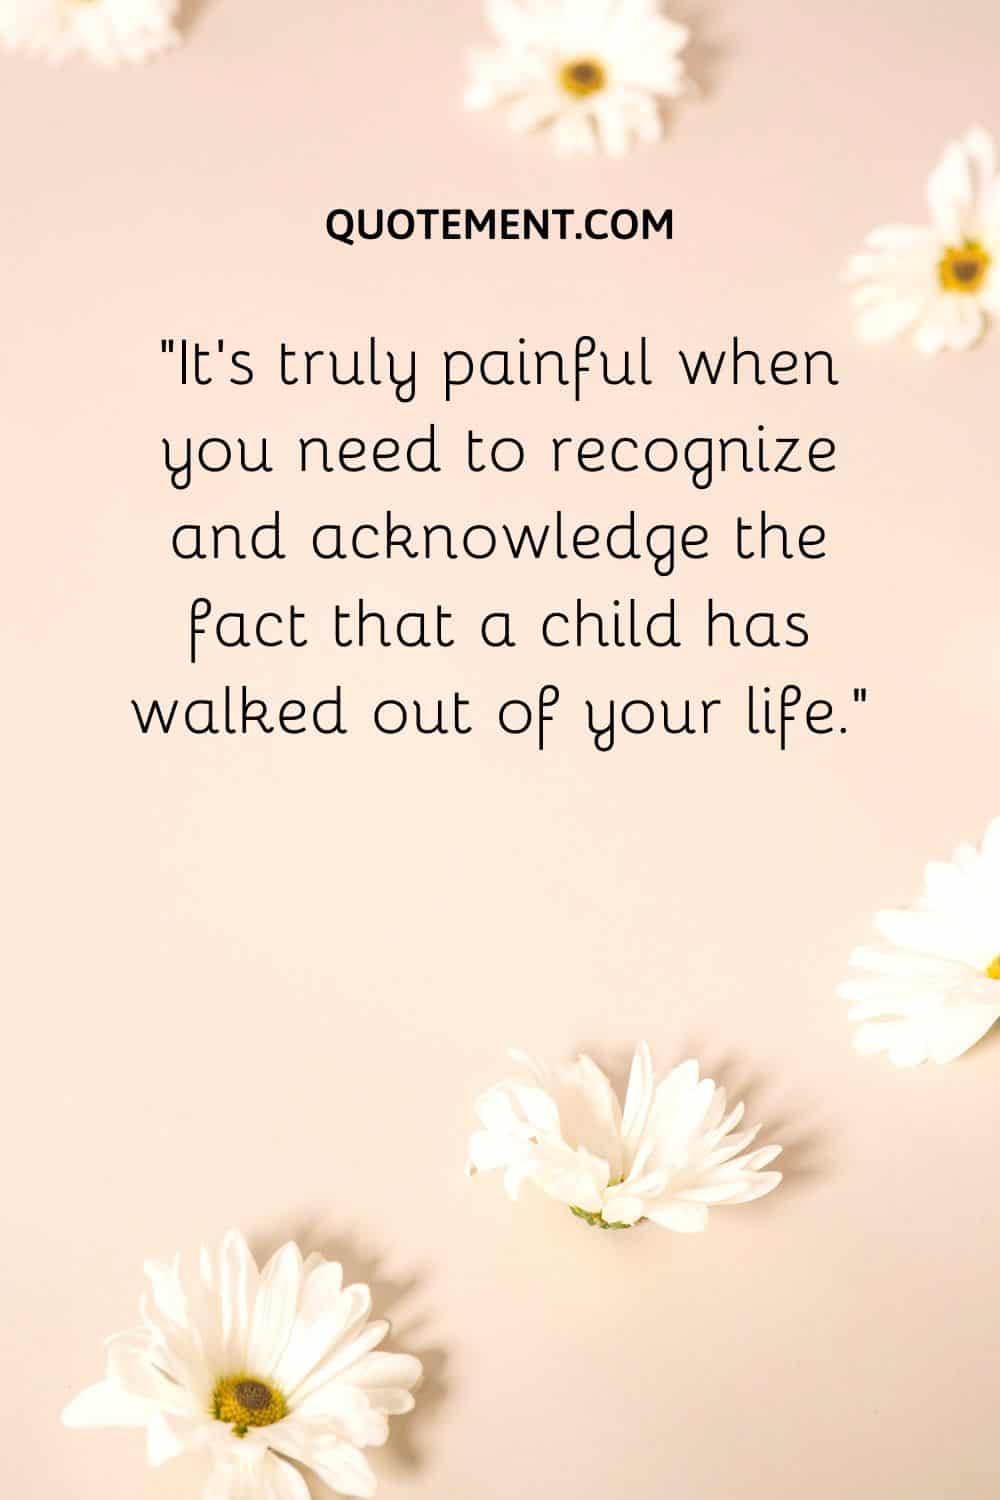 It’s truly painful when you need to recognize and acknowledge the fact that a child has walked out of your life.